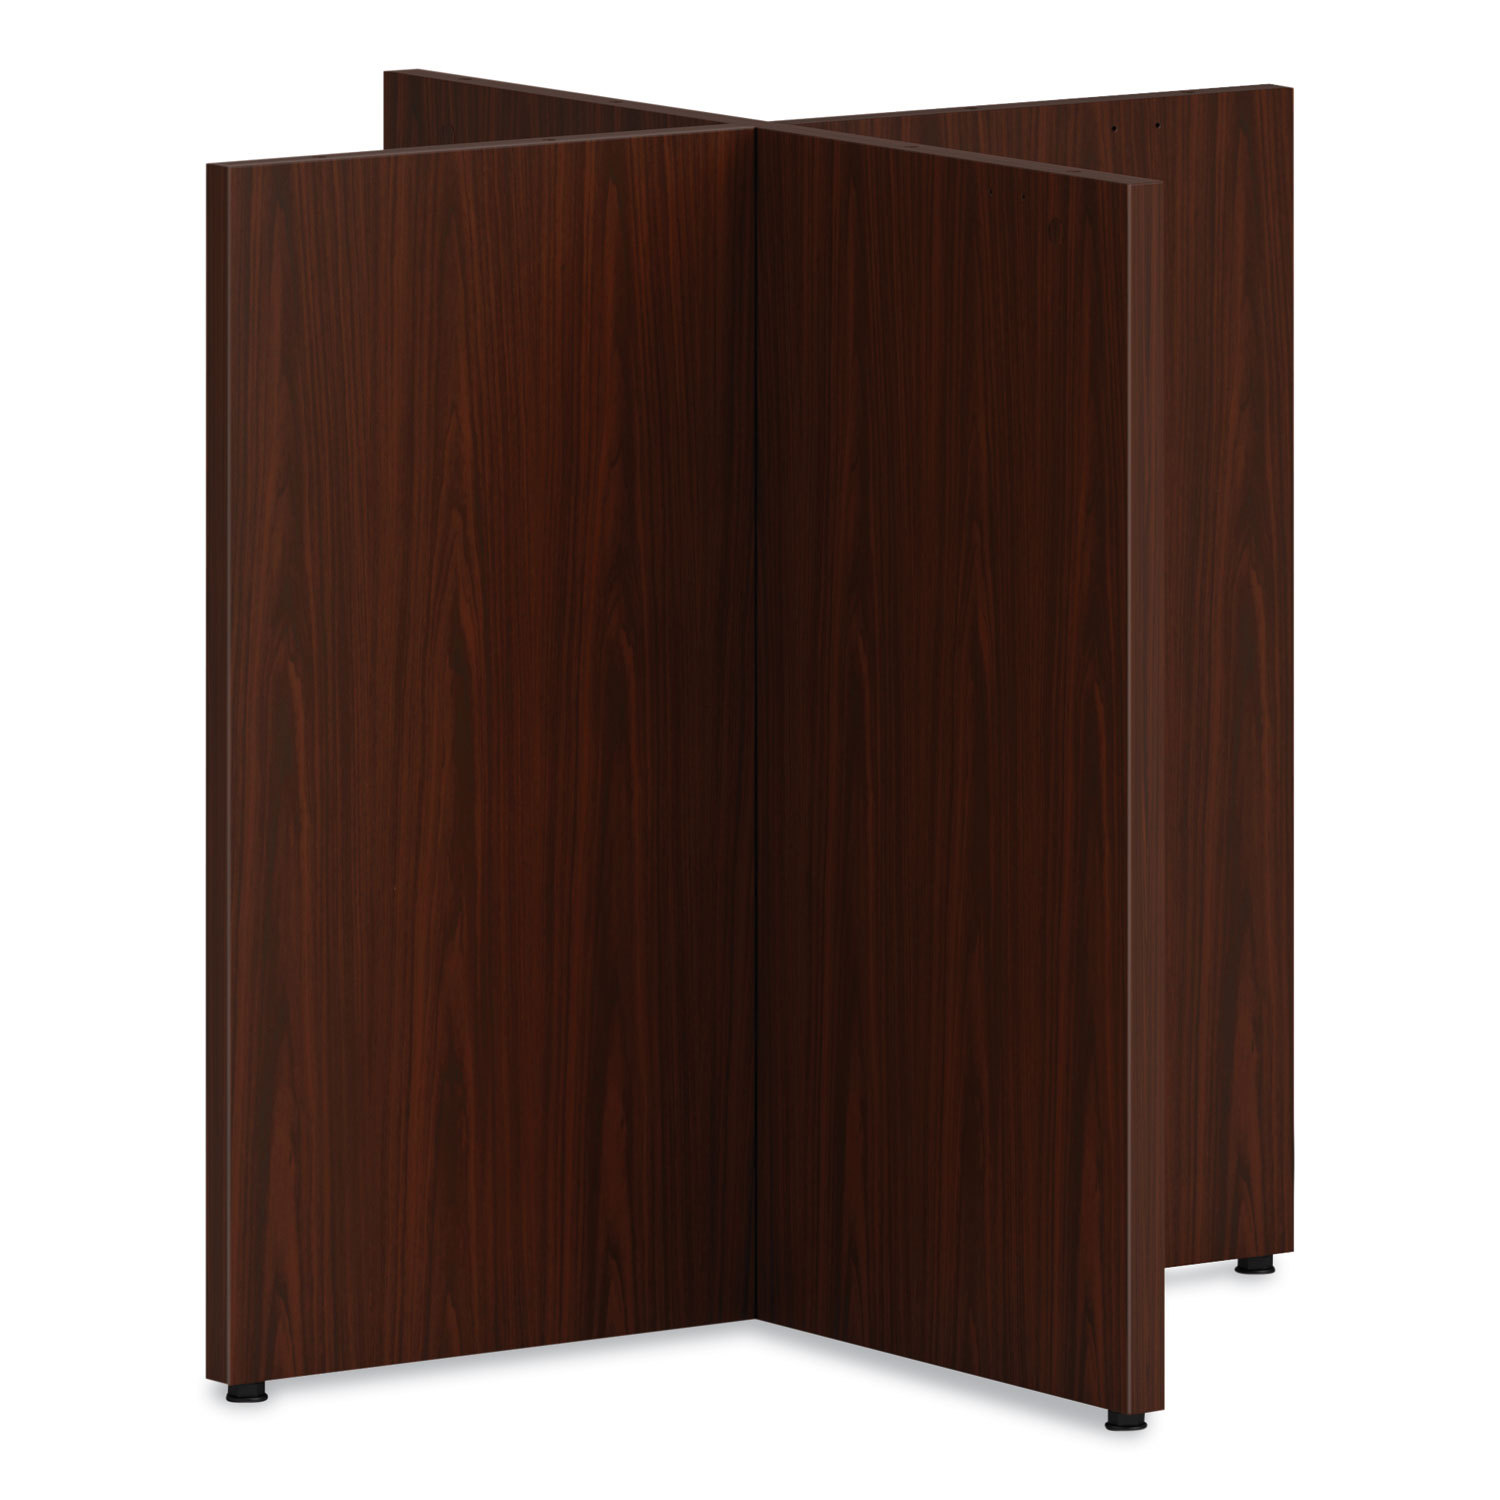  HON HONTBL48BSELT1 Mod X-Base for 48 Table Tops, Traditional Mahogany (HONTBL48BSELT1) 